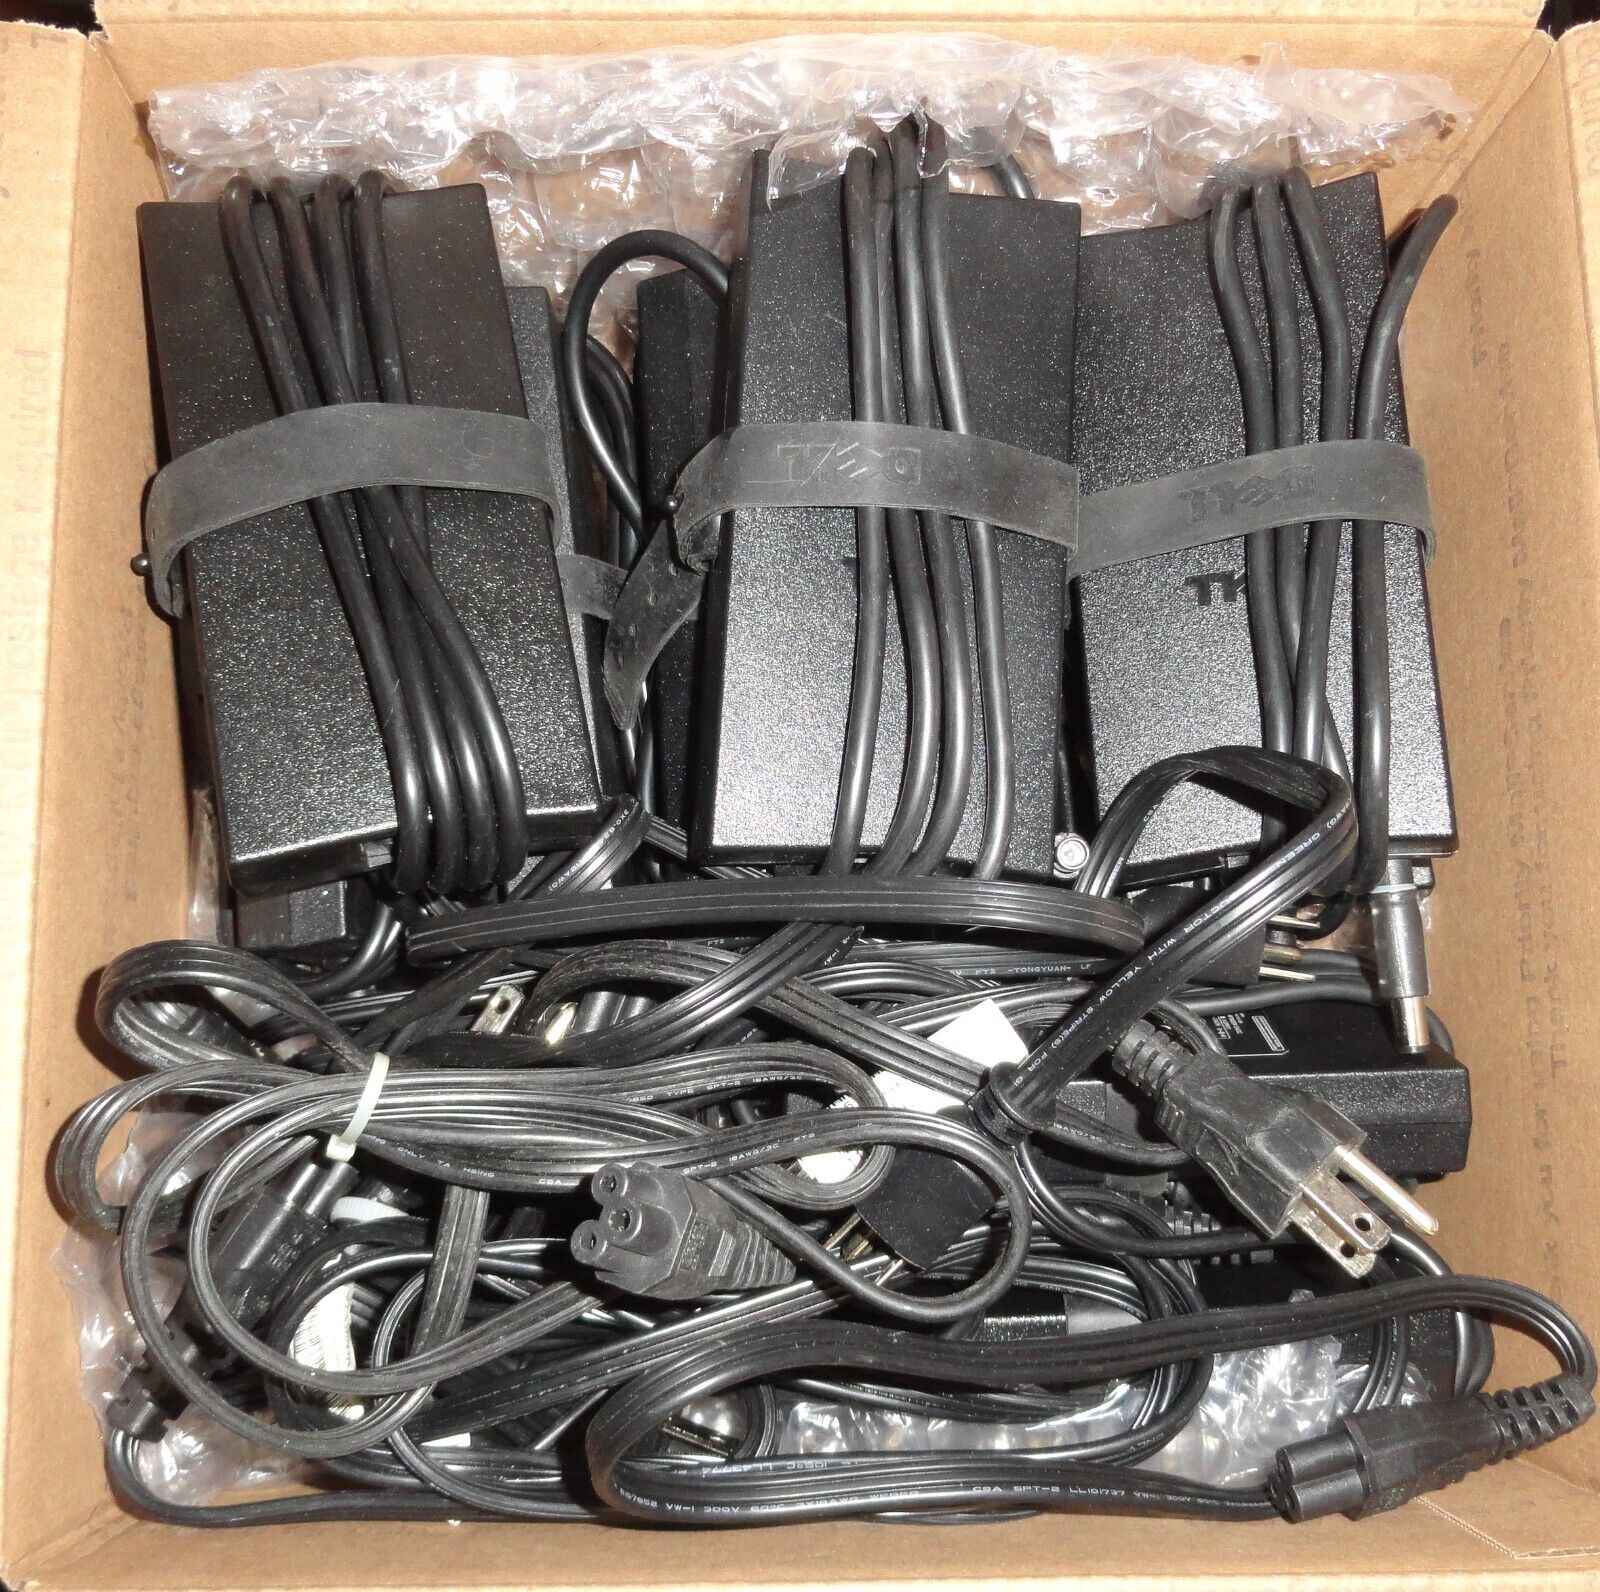 Lot of 10 Genuine OEM Dell 130w PA-4E Fam Laptop AC Adapter Charger Qty Avail